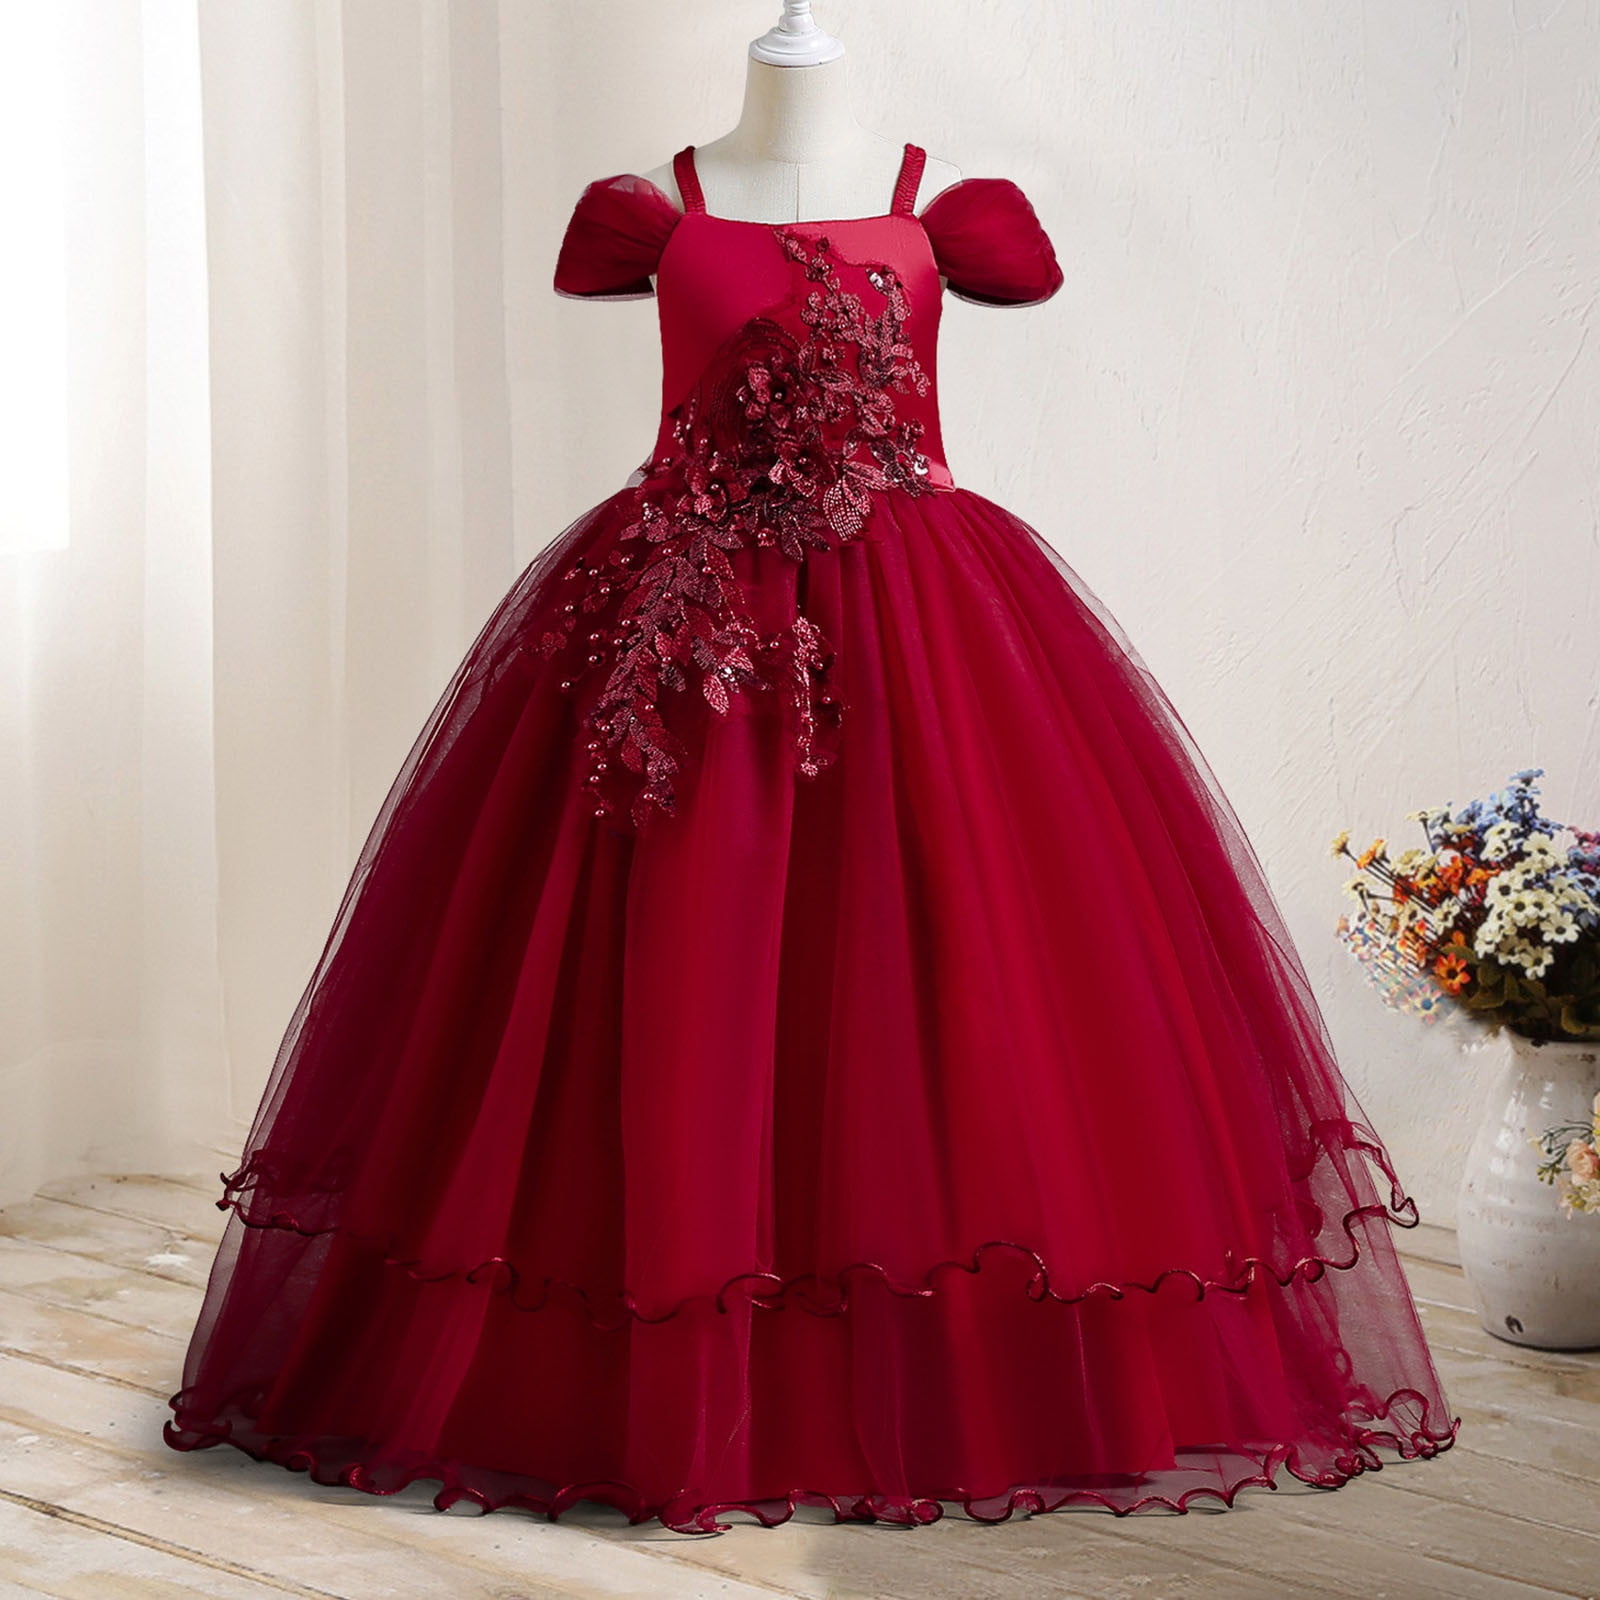 Buy THE LONDON STORE Baby Girl's Red Organza Kids Ball Gown (2-Years, Red)  at Amazon.in